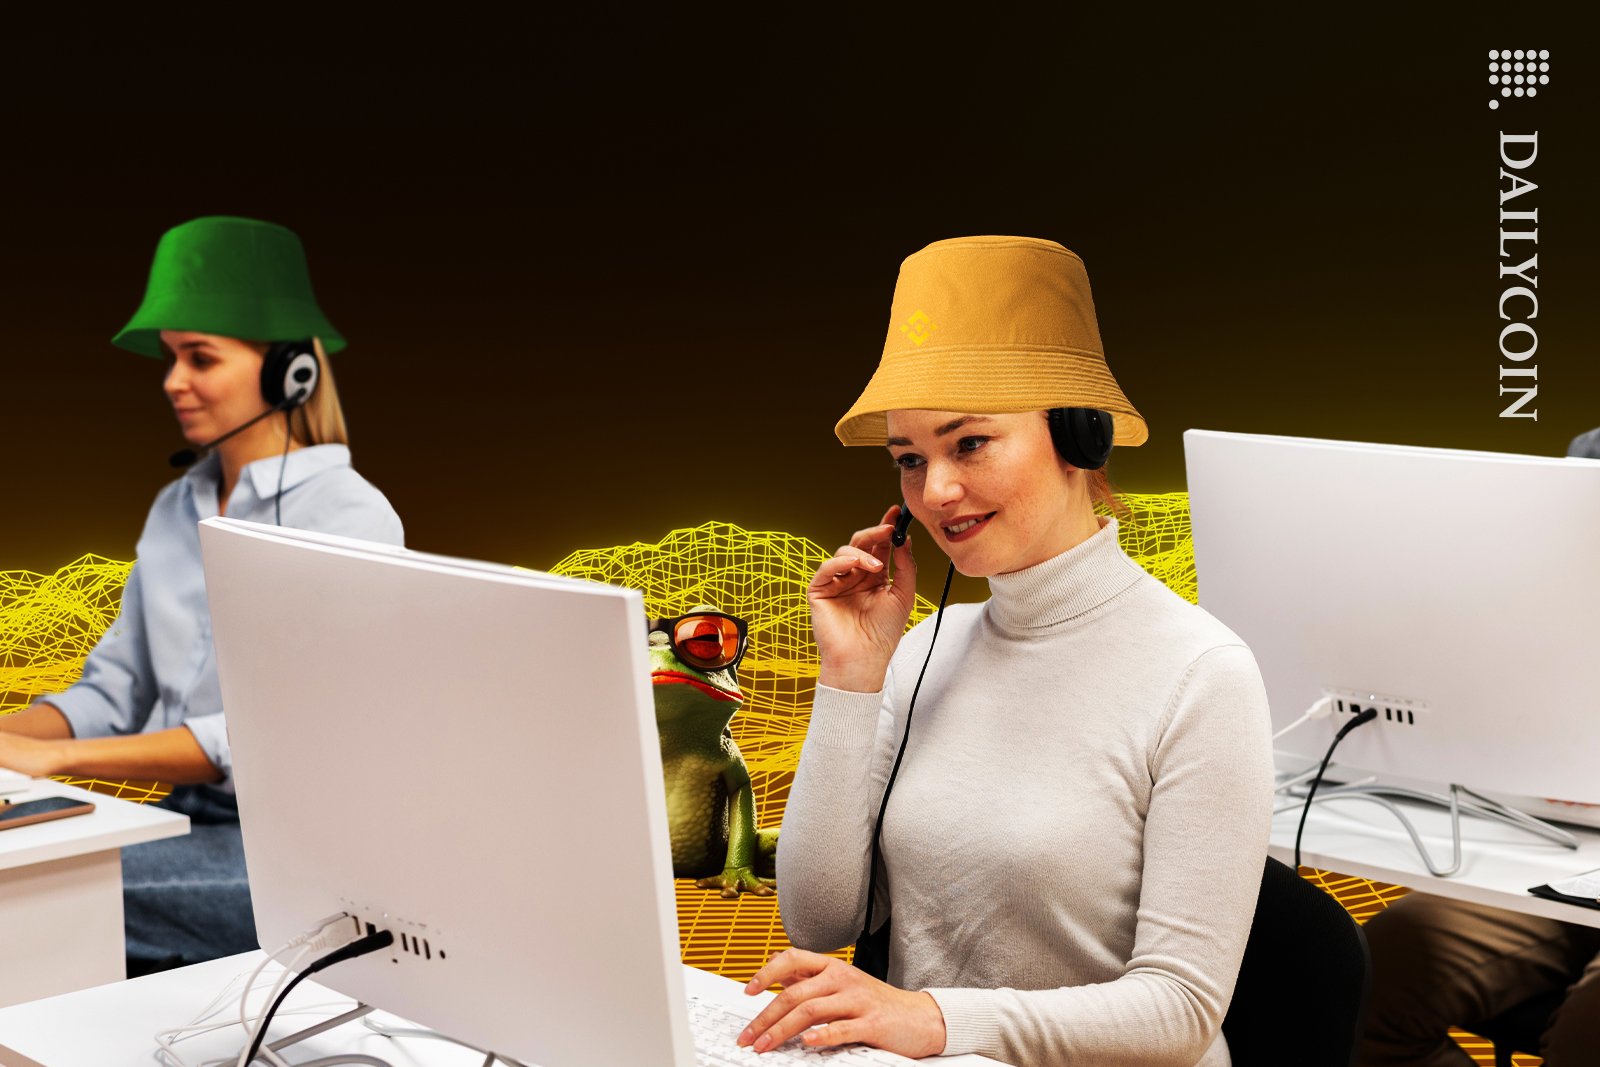 Binance support centre workers wearing hats, and a frog watching over them.